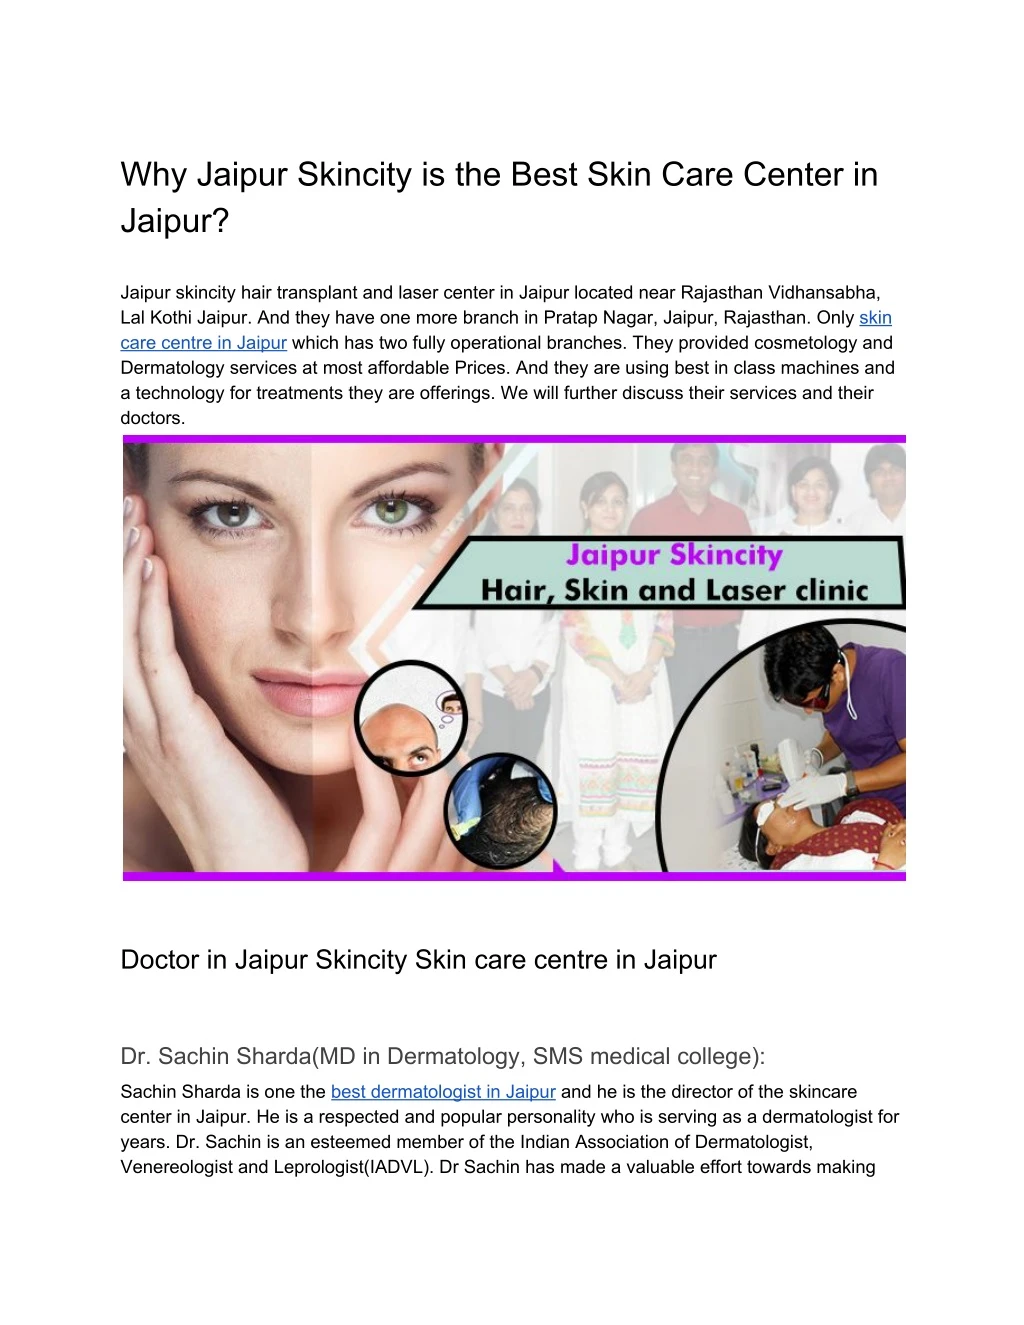 why jaipur skincity is the best skin care center